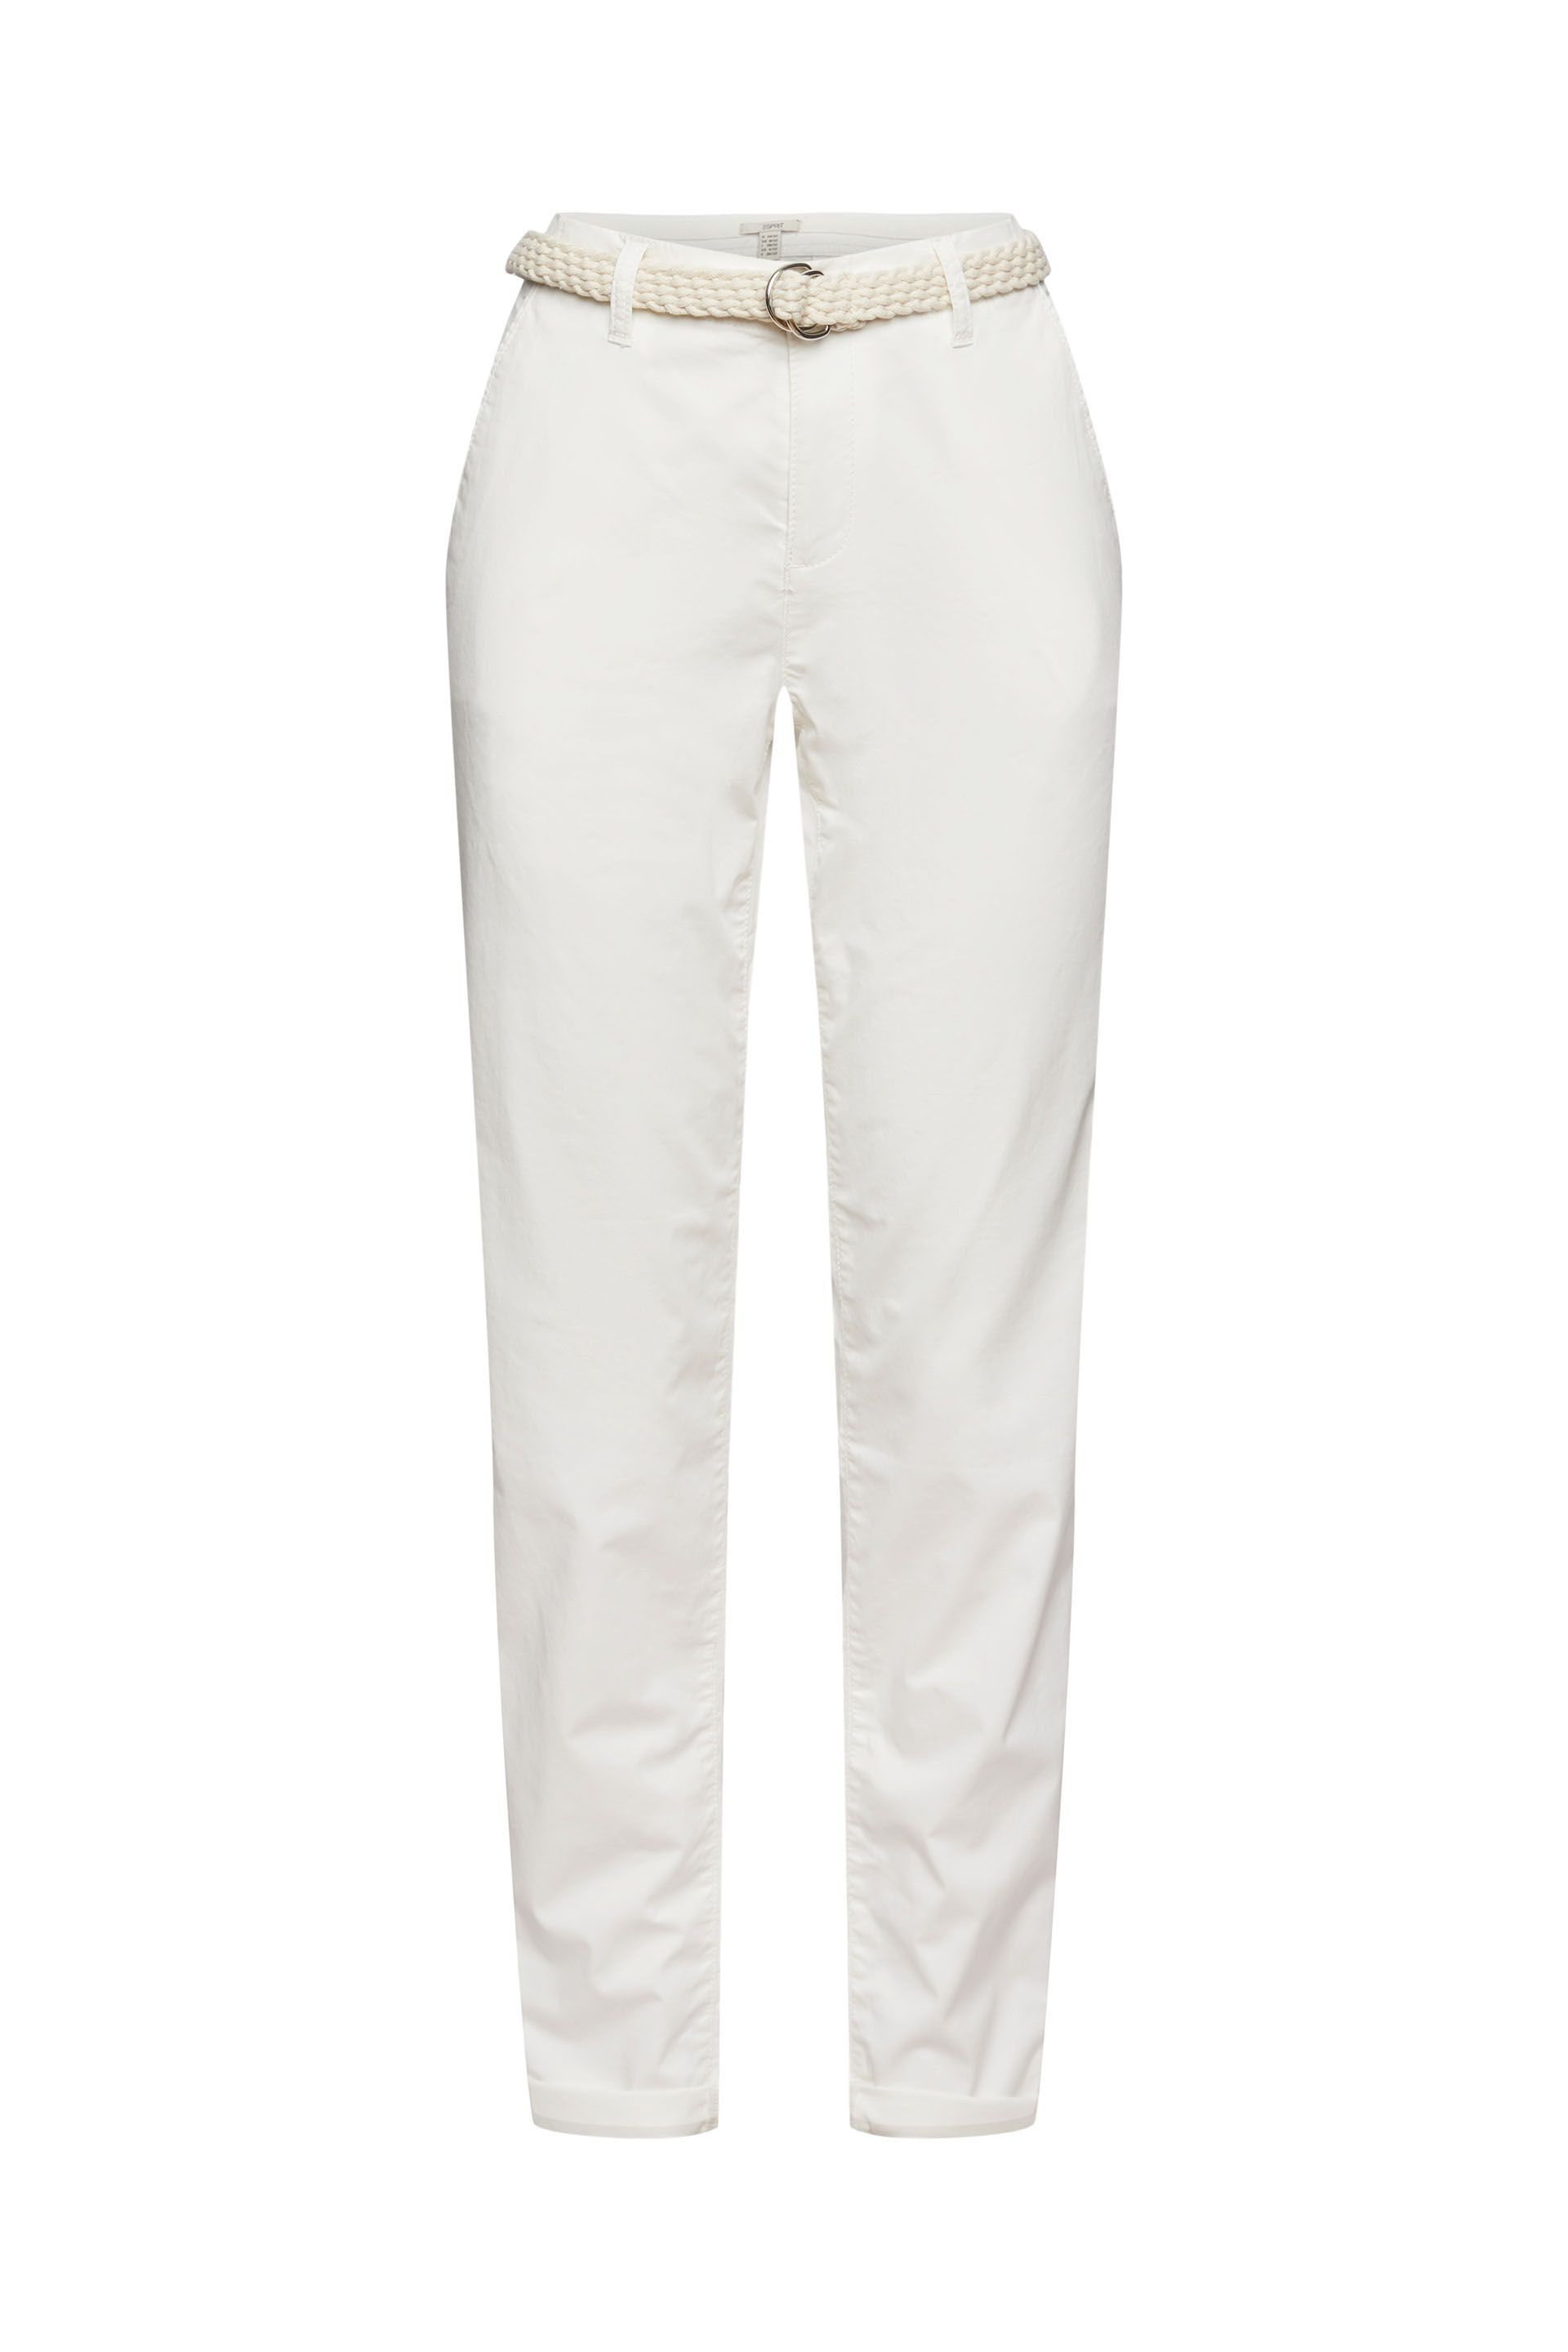 Chino trousers with woven belt, White, large image number 0